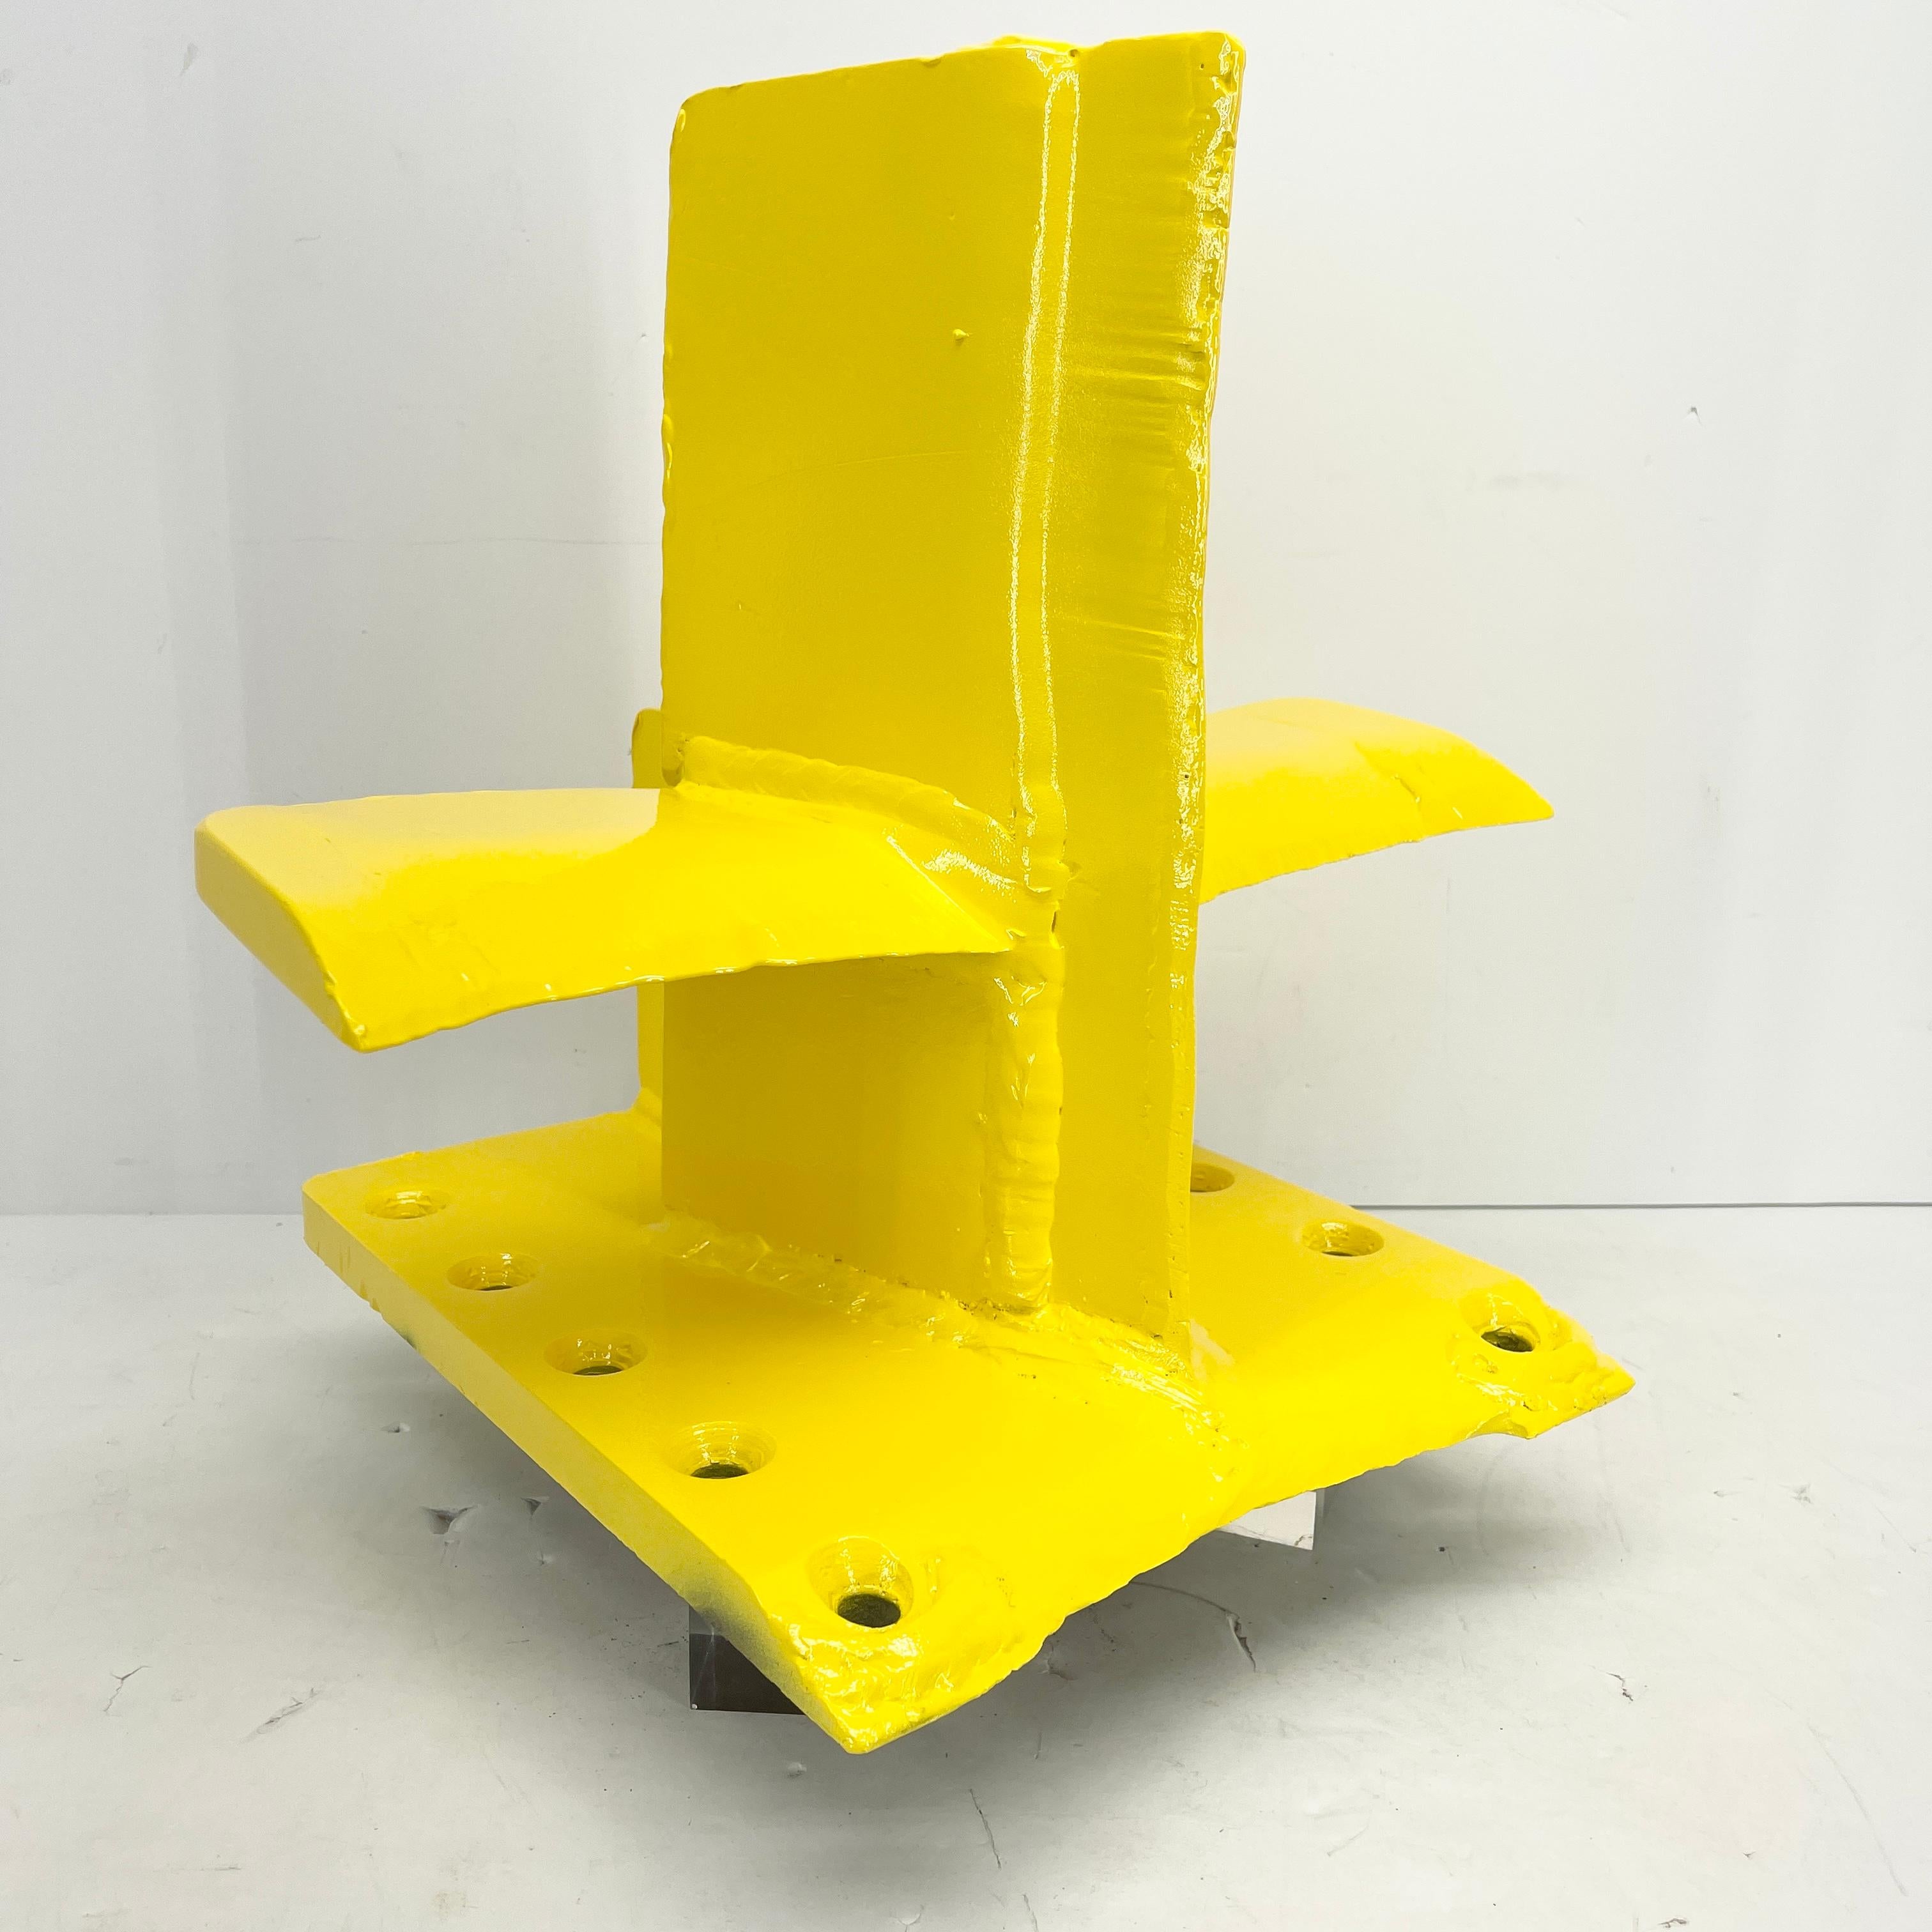 Bright Sunshine Yellow Abstract Eagle Head Sculpture From a 3 Way Wood Splitter For Sale 6